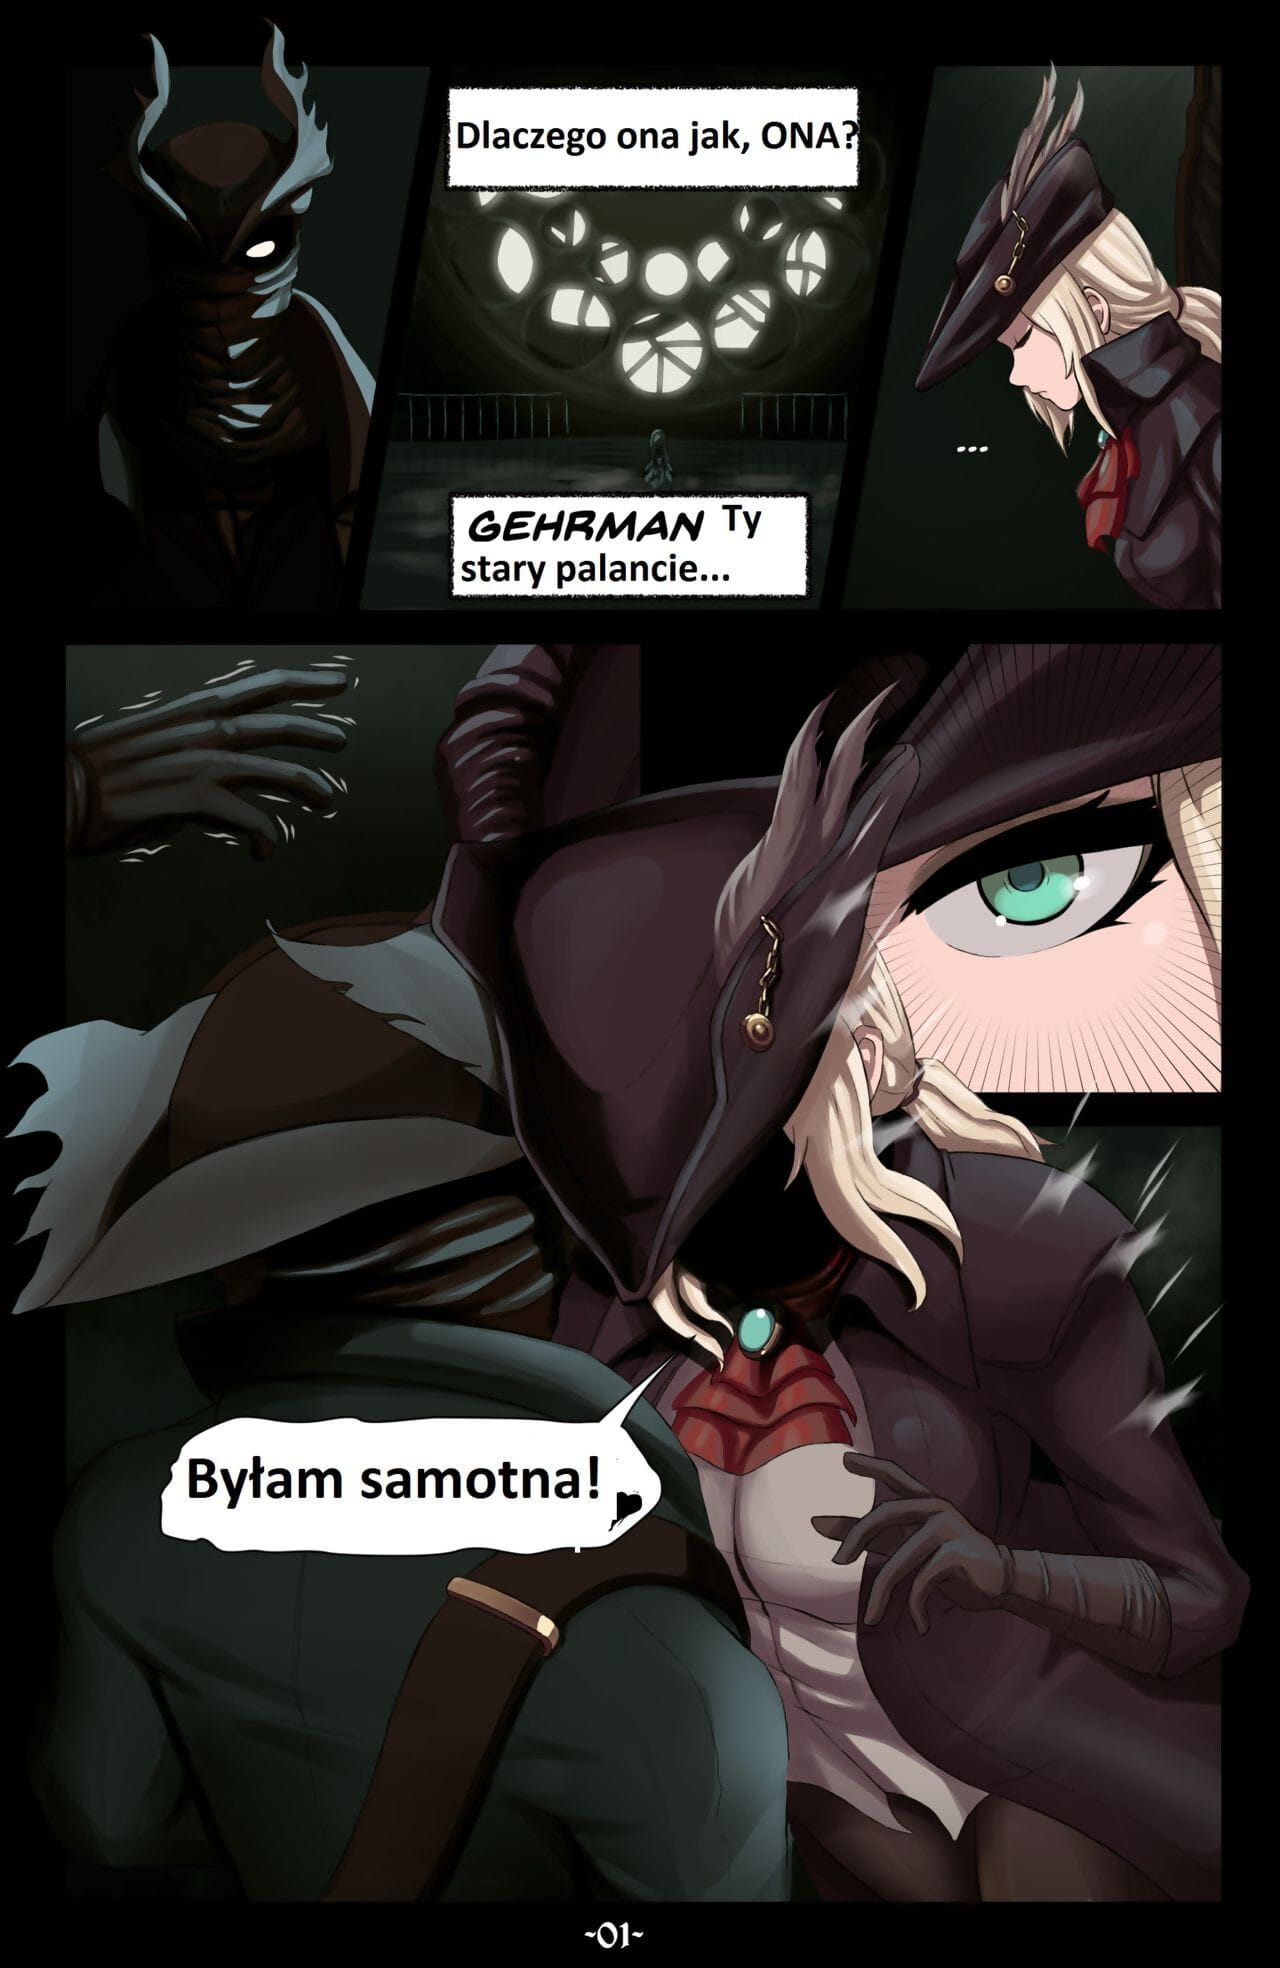 Lady Maria of the Astral Cocktower page 1